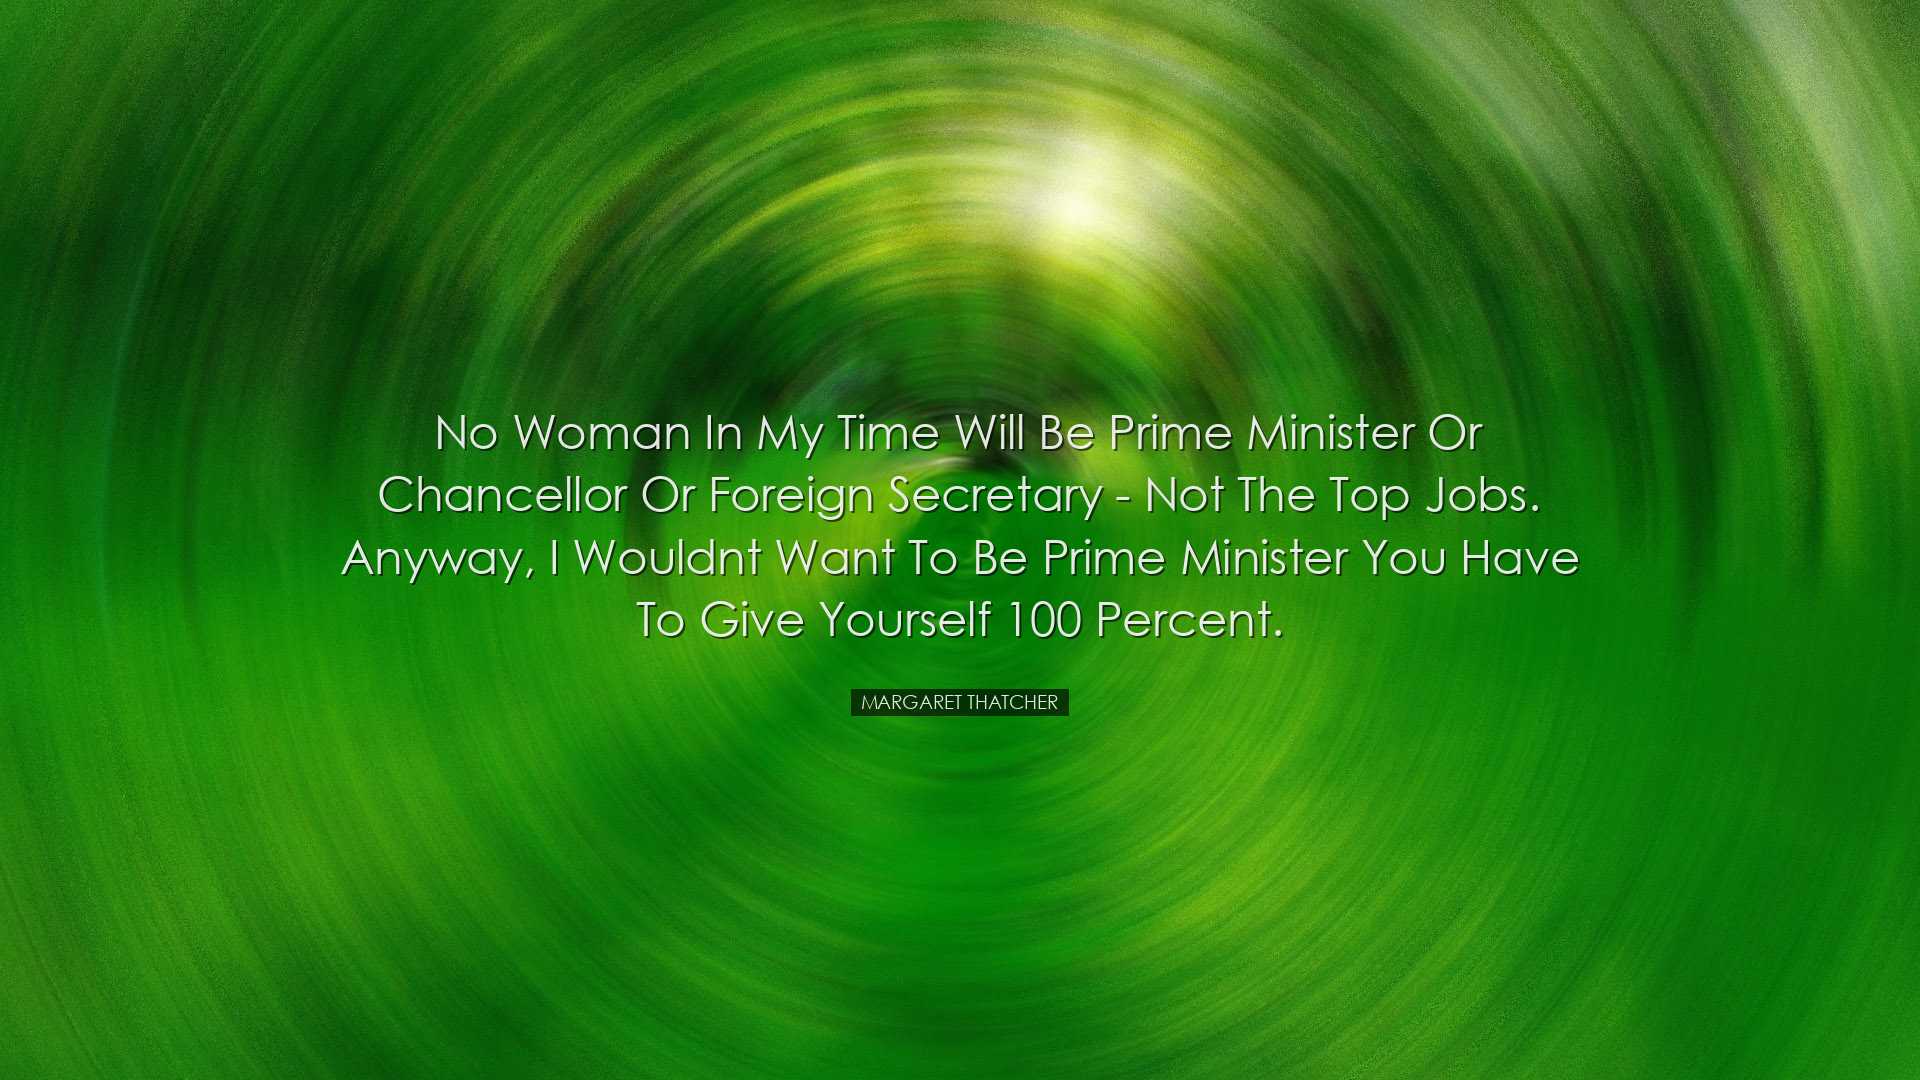 No woman in my time will be prime minister or chancellor or foreig